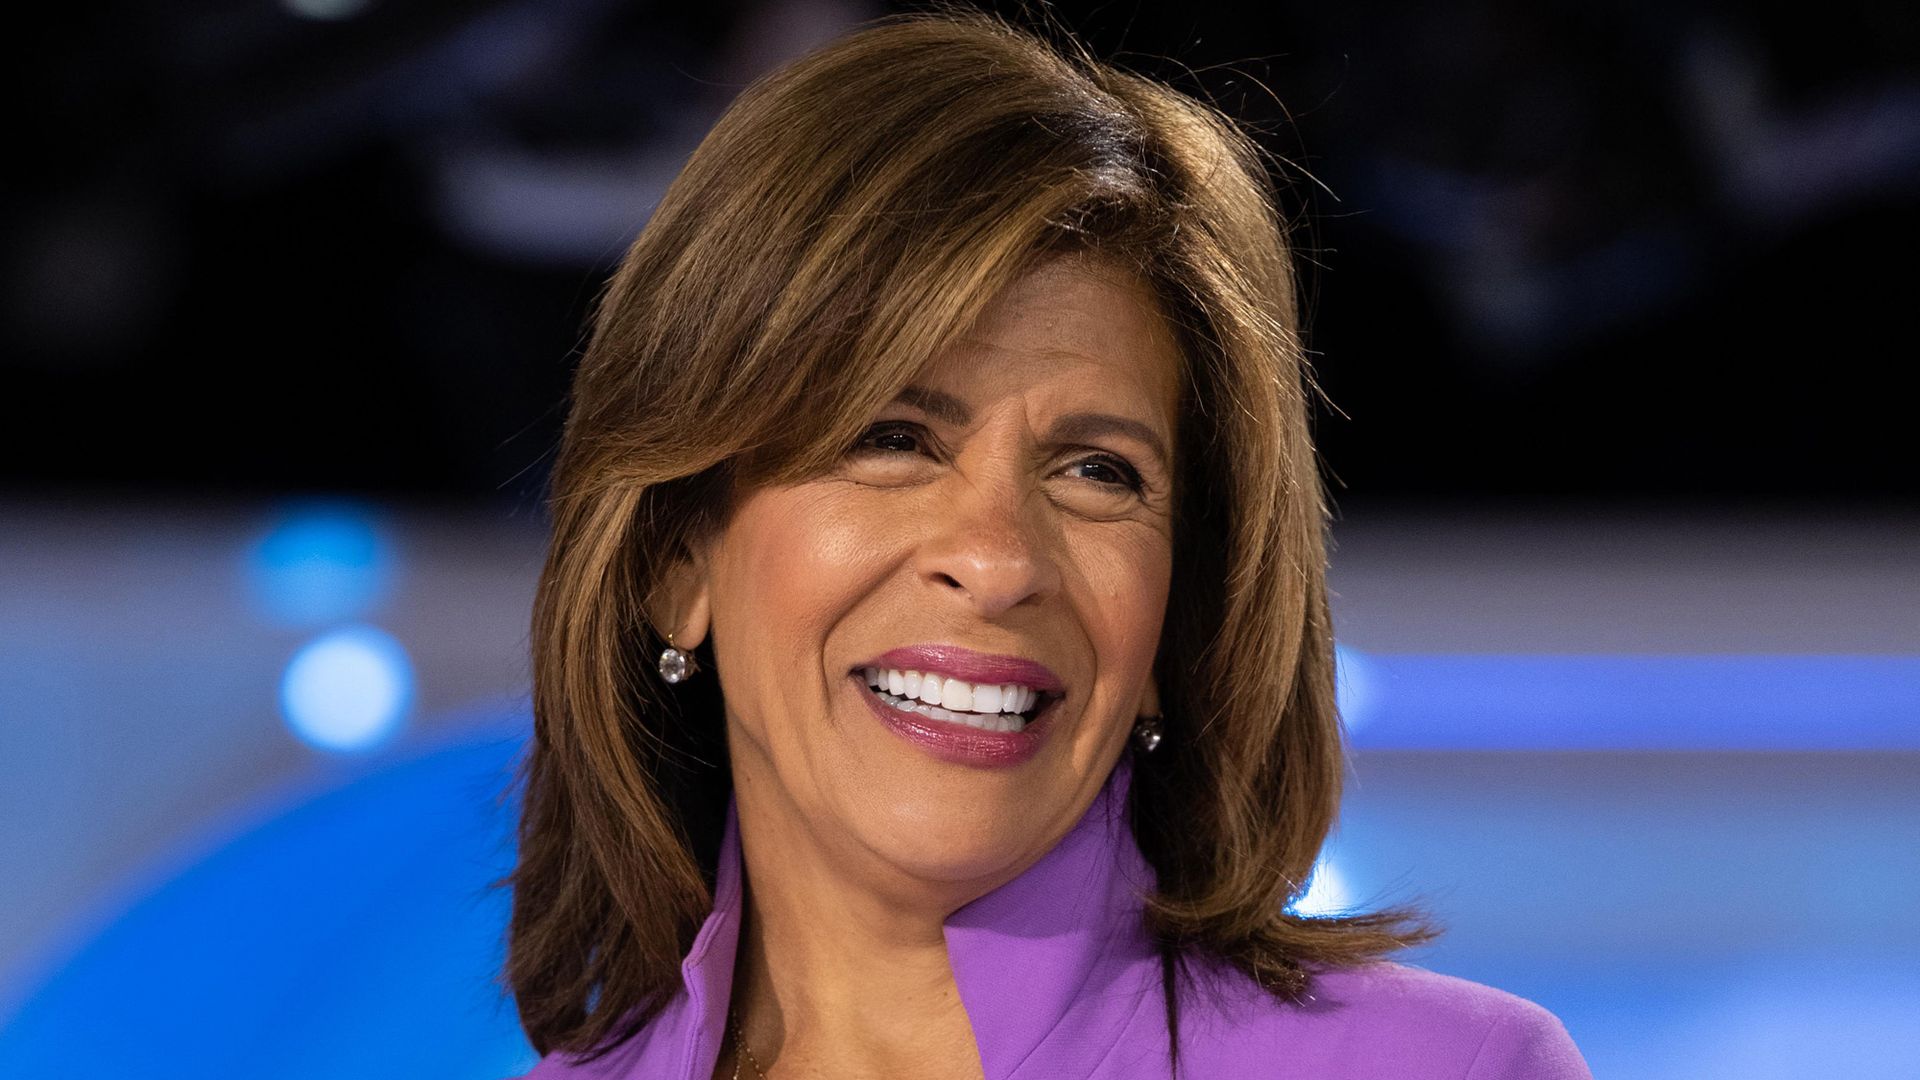 Hoda Kotb shares cryptic message about change alongside new family photo with someone special